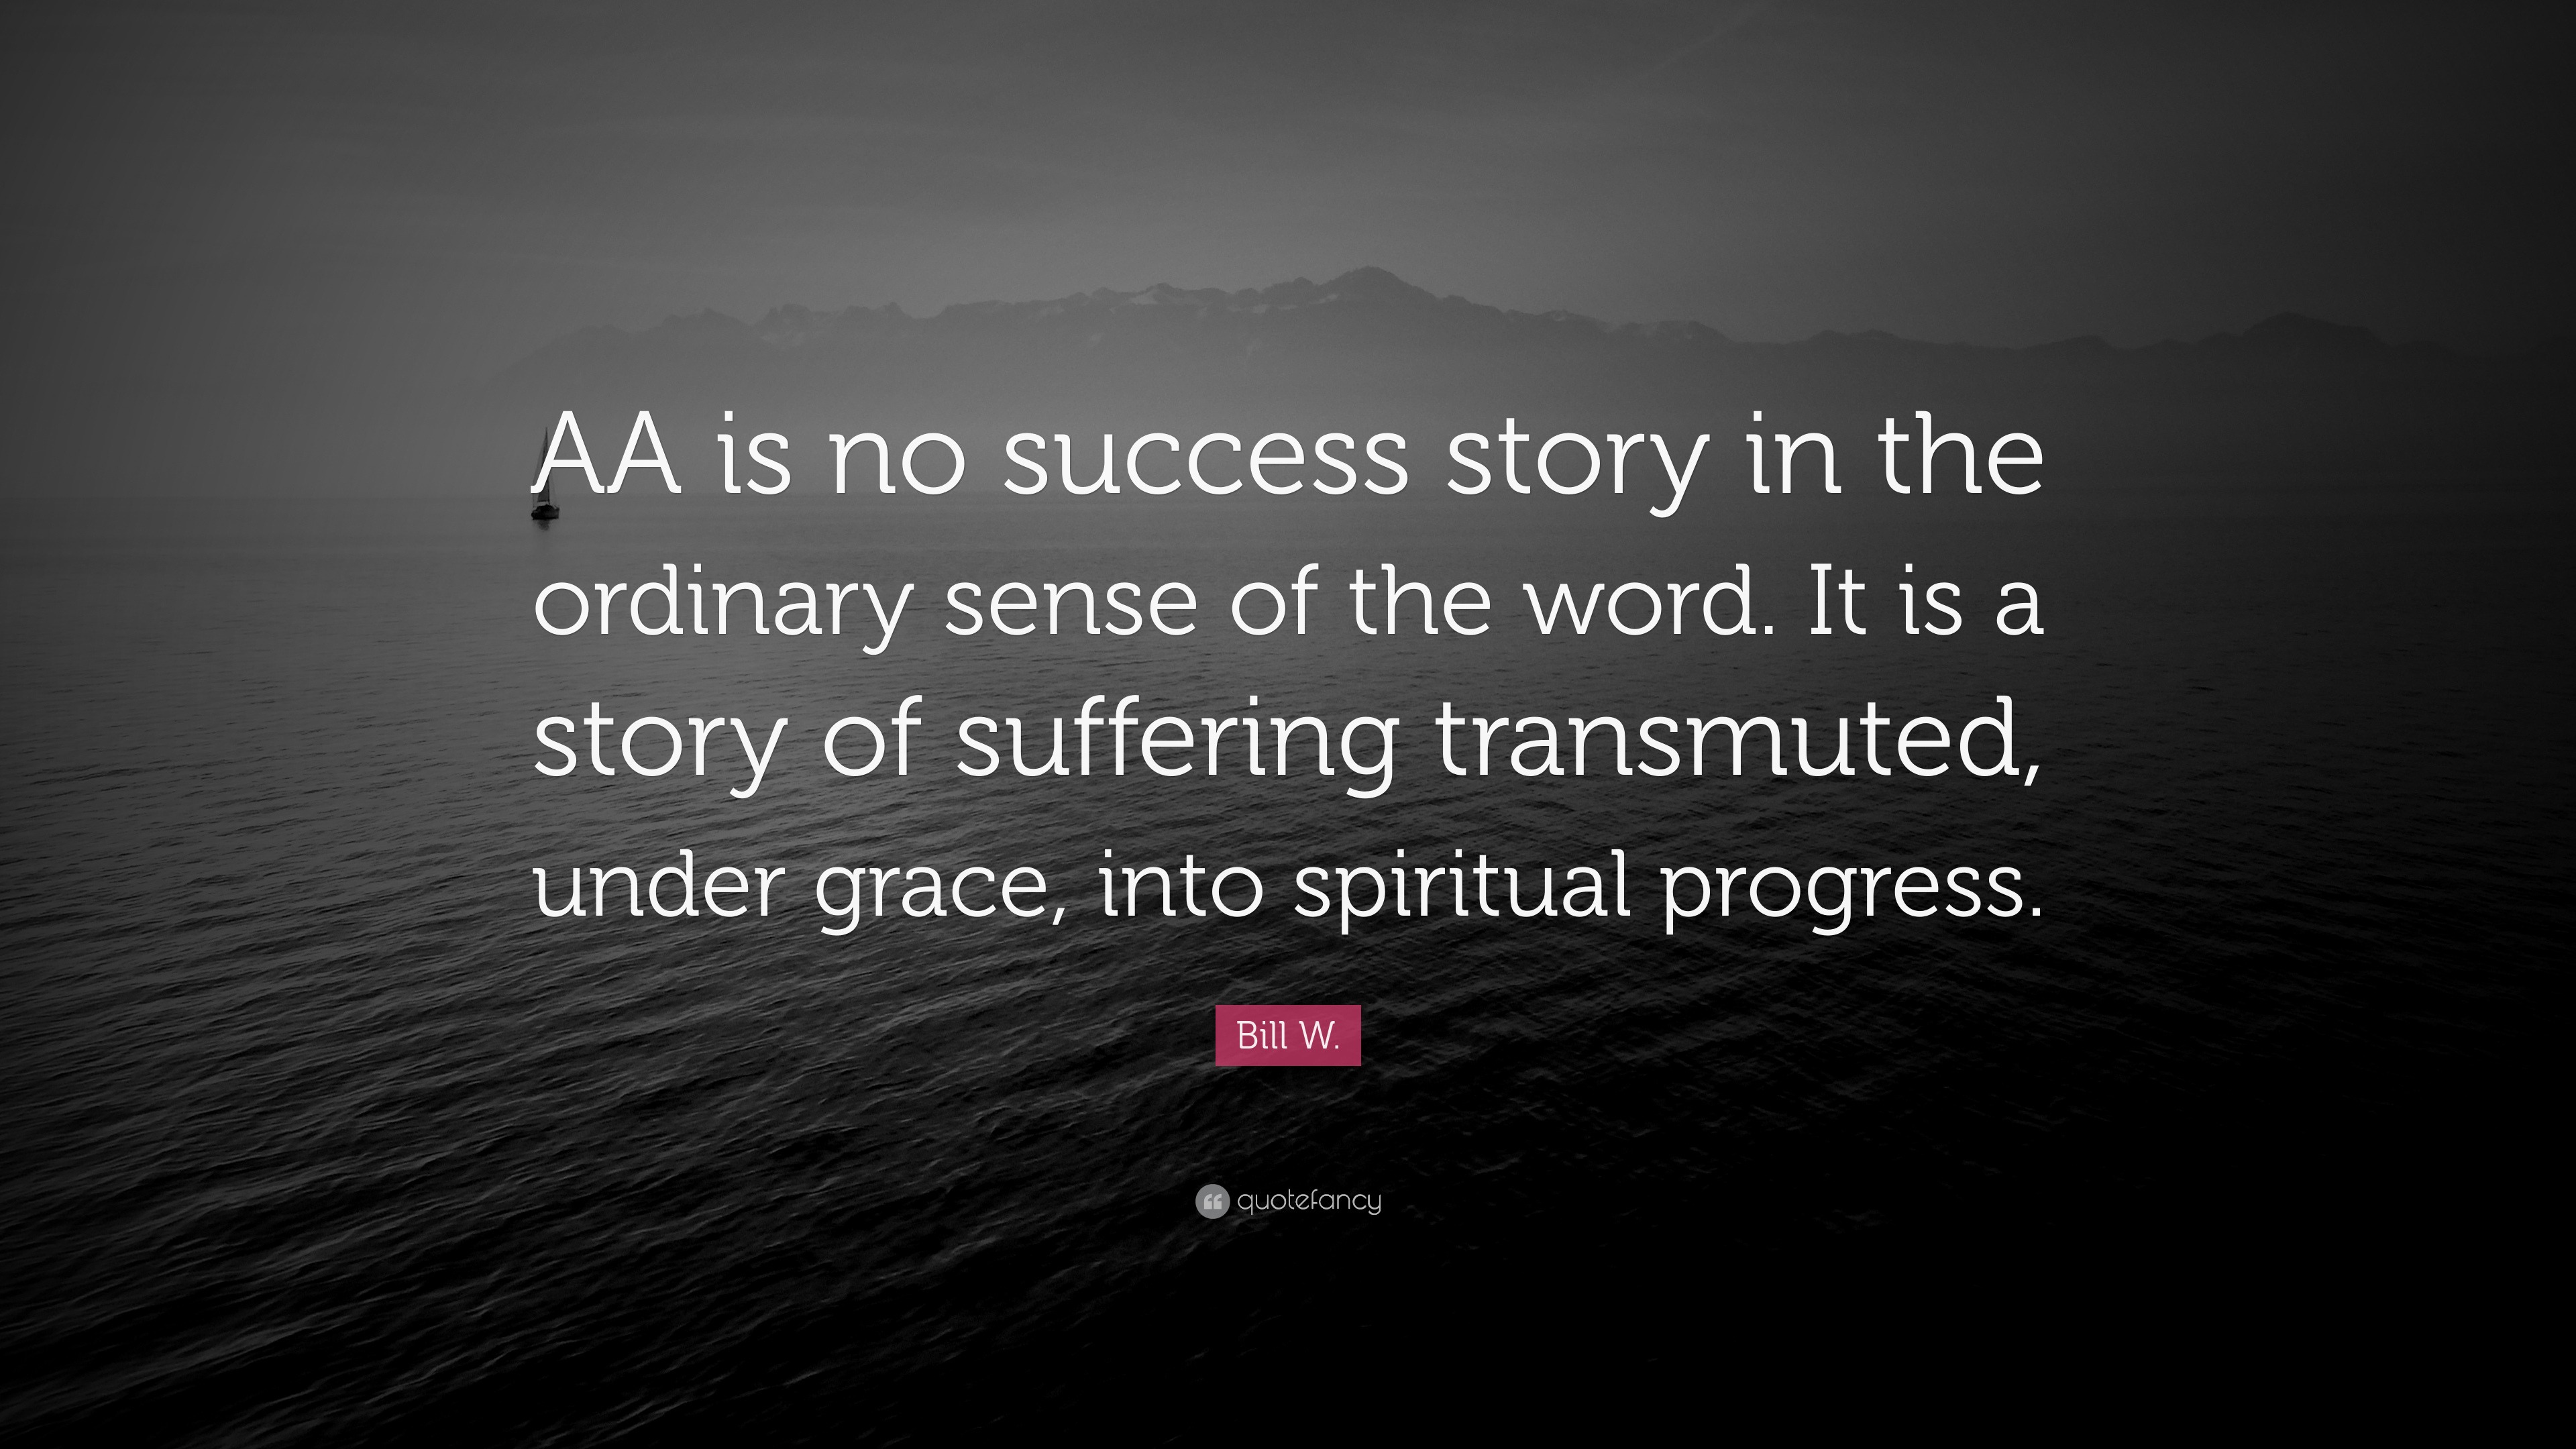 Bill W. Quote: “AA is no success story in the ordinary sense of the